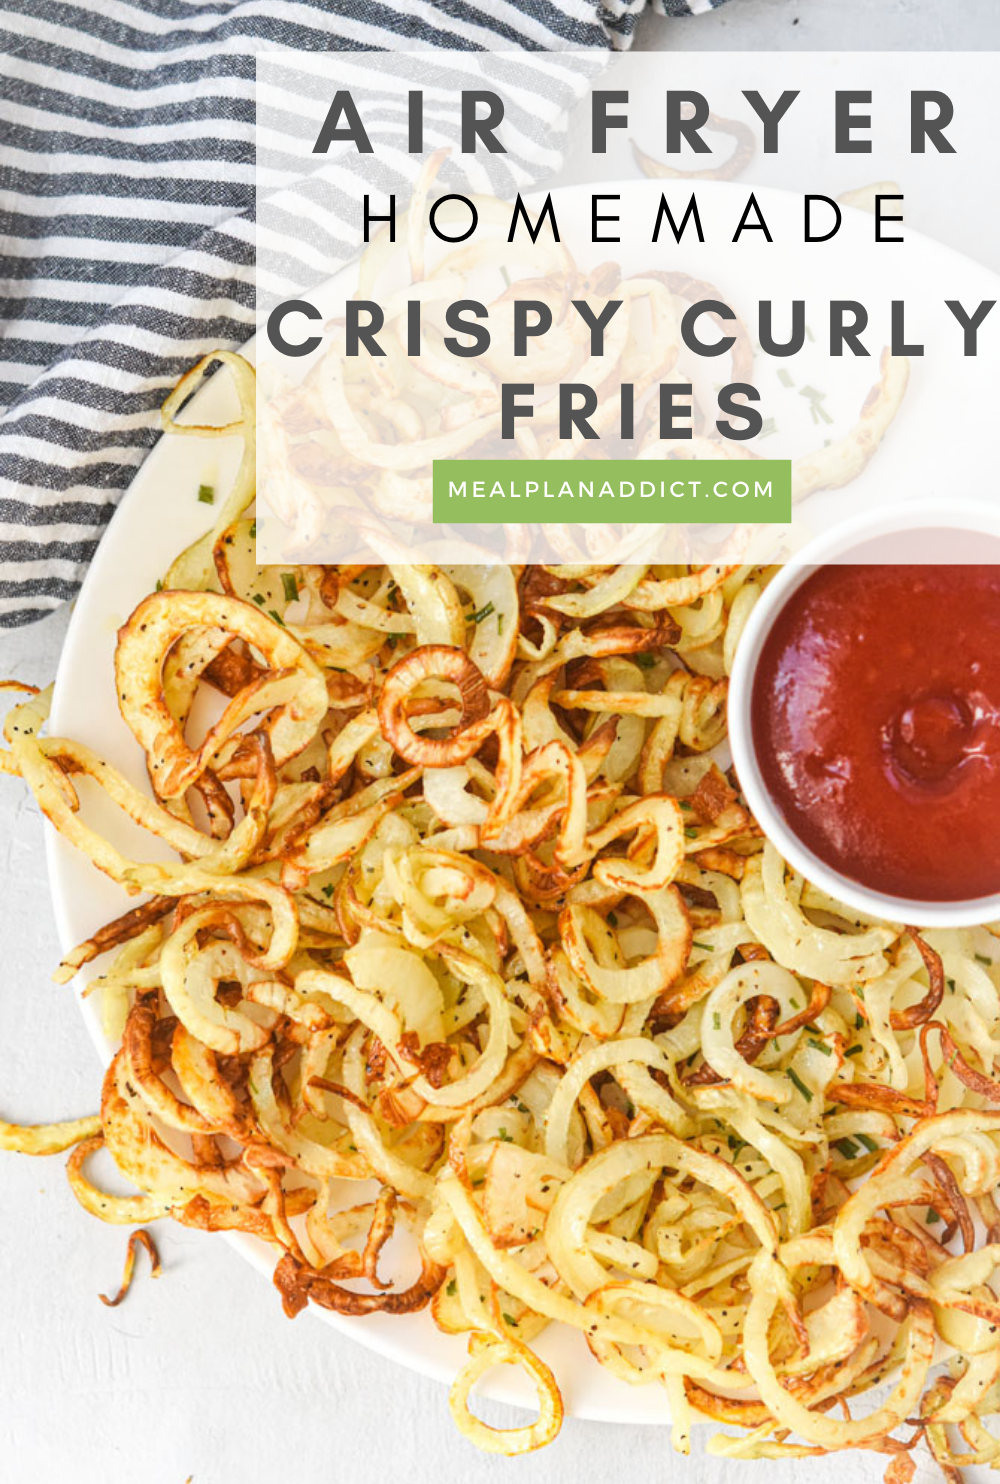 Crispy curly fries pin for Pinterest